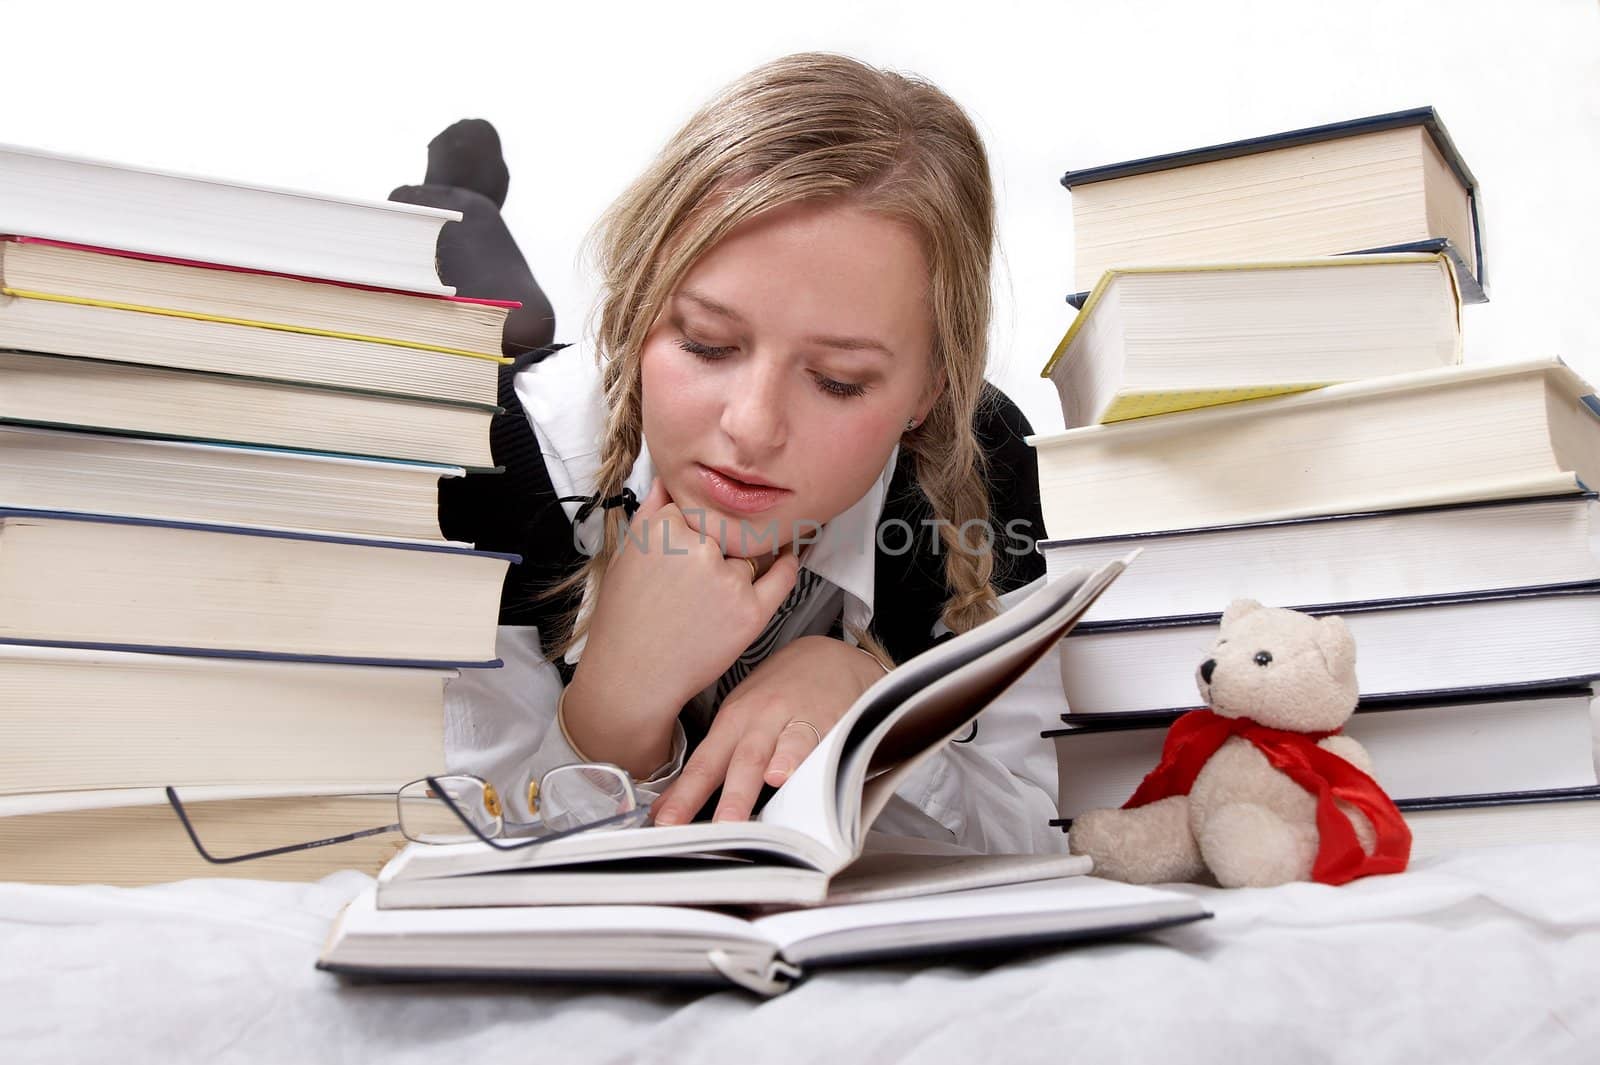 schoolgirl or student reading books by amaxim